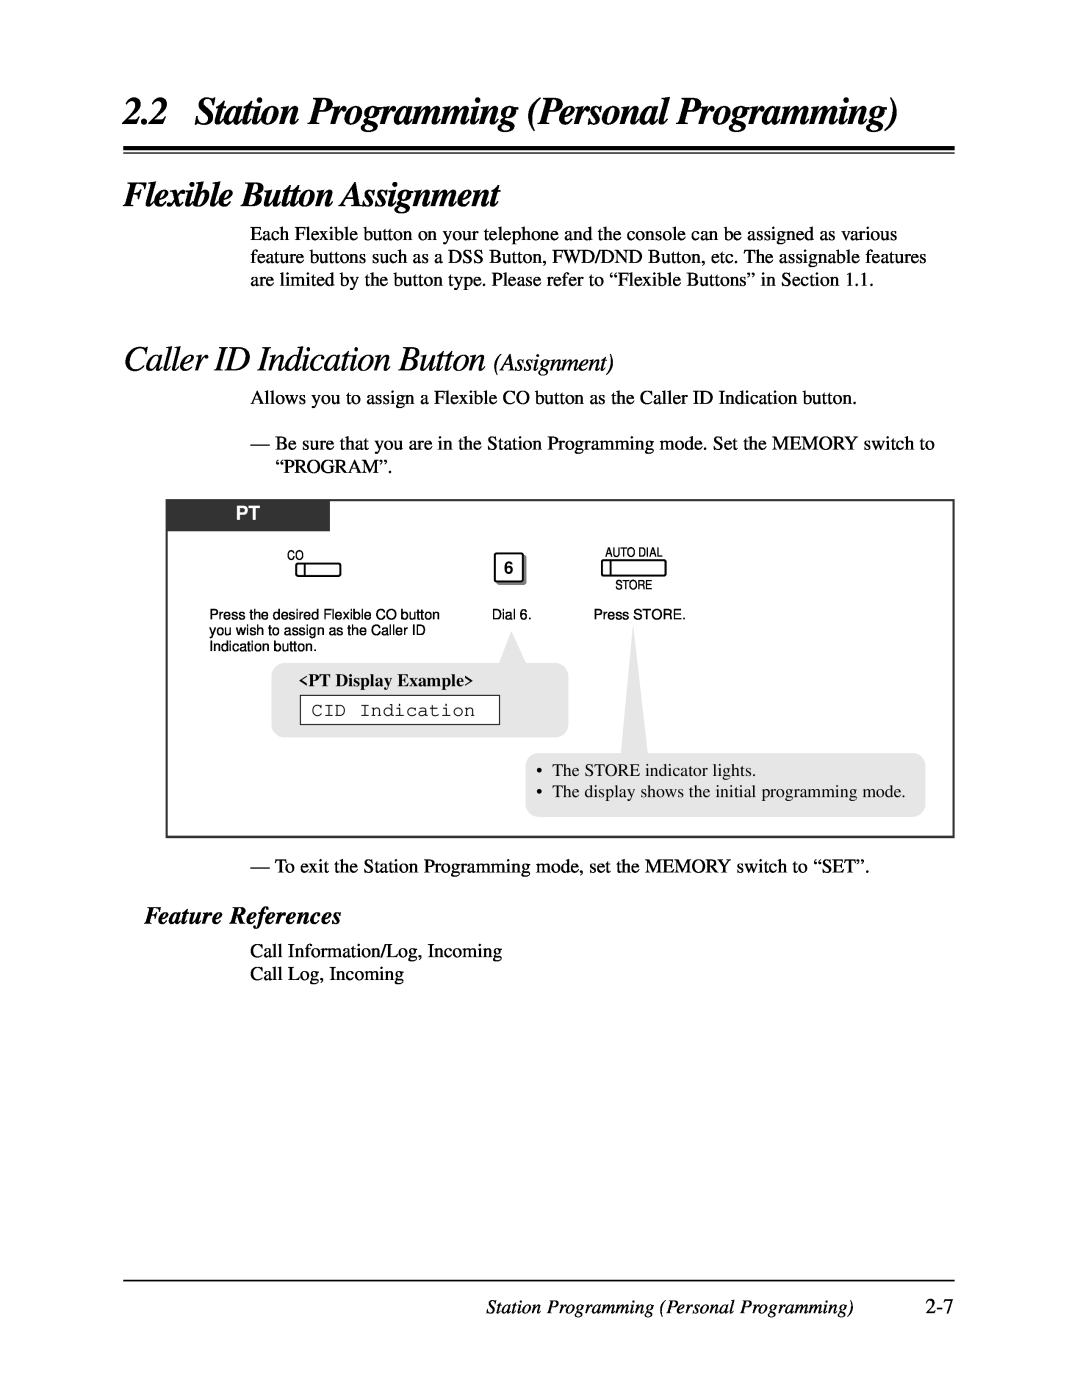 Panasonic KX-TA624 user manual Flexible Button Assignment, Caller ID Indication Button Assignment, Feature References 